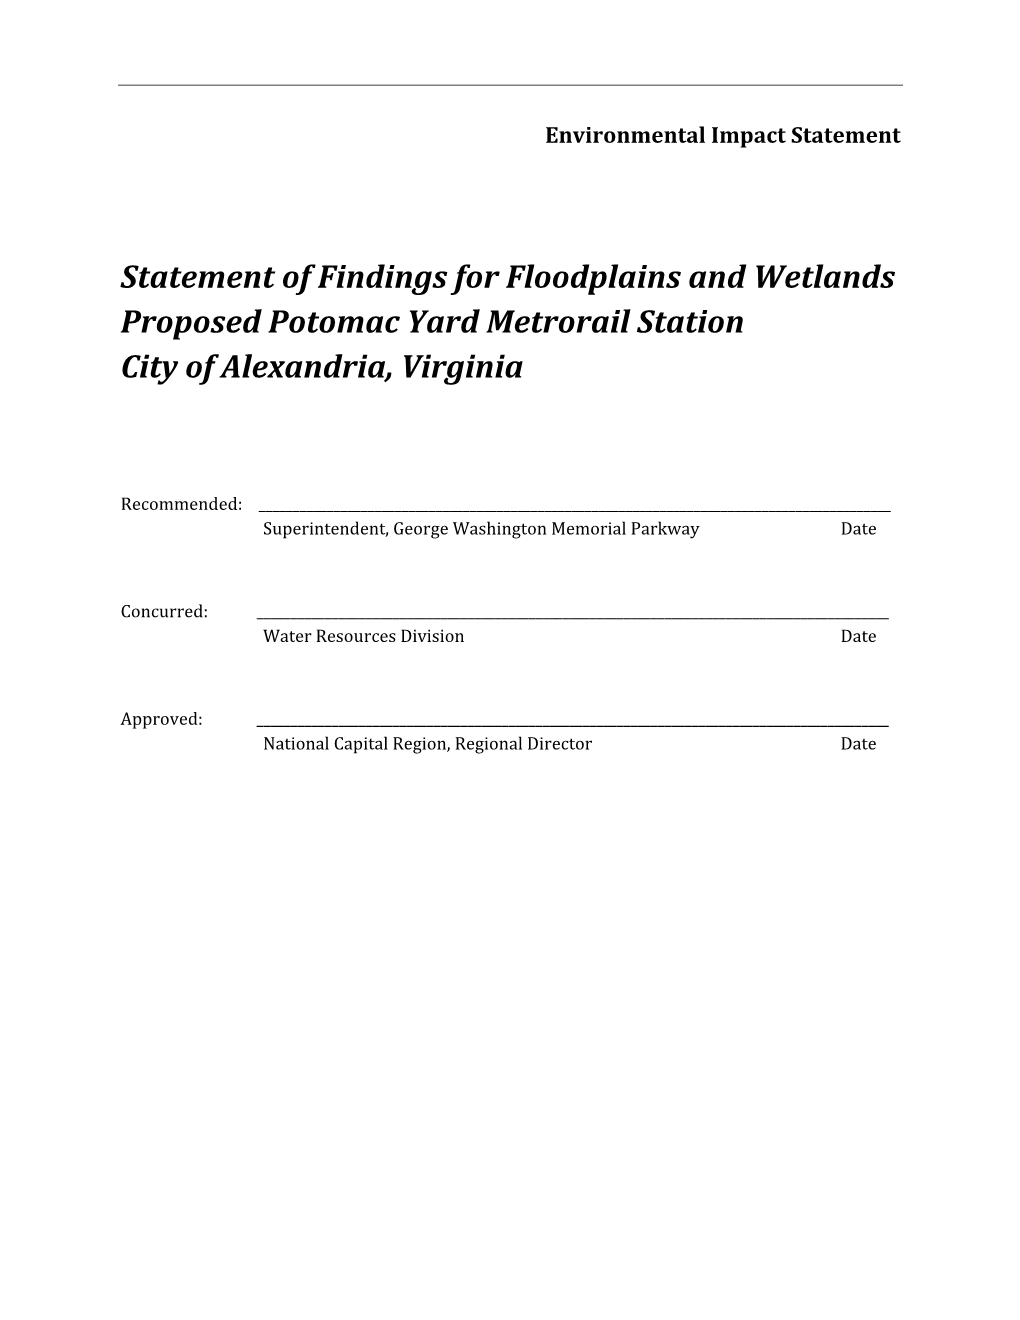 Statement of Findings for Floodplains and Wetlands Proposed Potomac Yard Metrorail Station City of Alexandria, Virginia